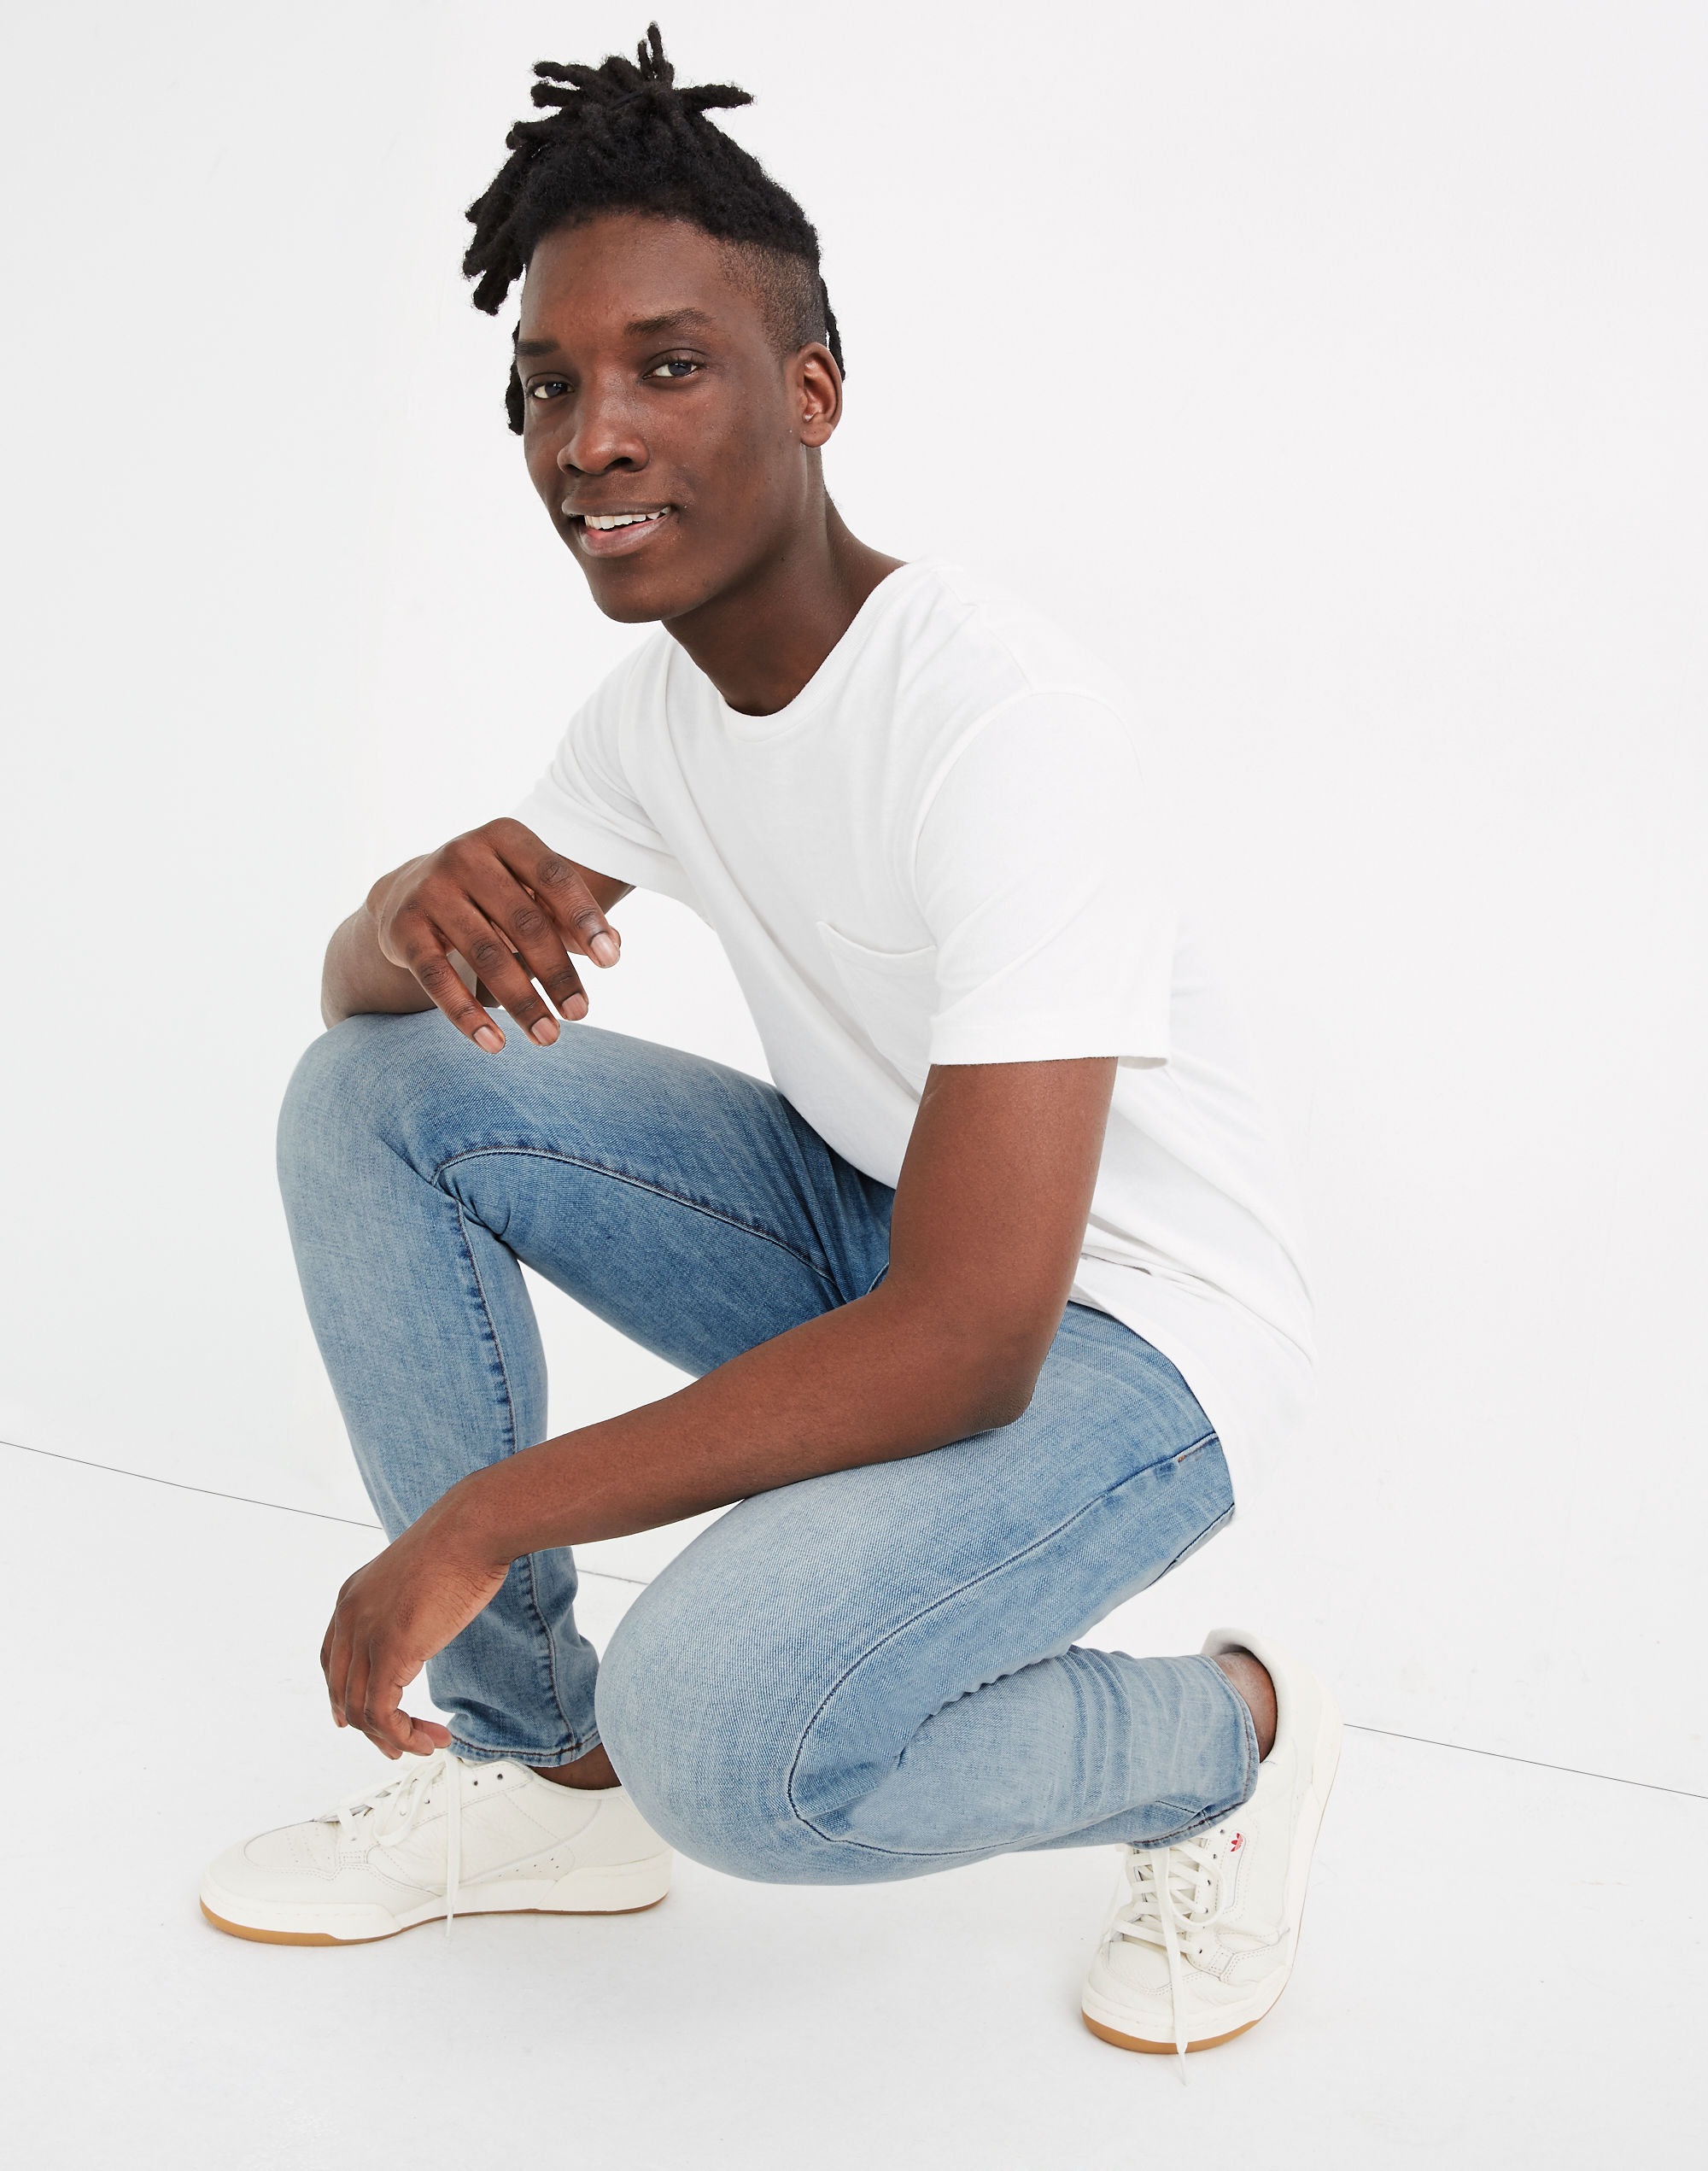 Athletic Slim Jeans in Campaign Wash